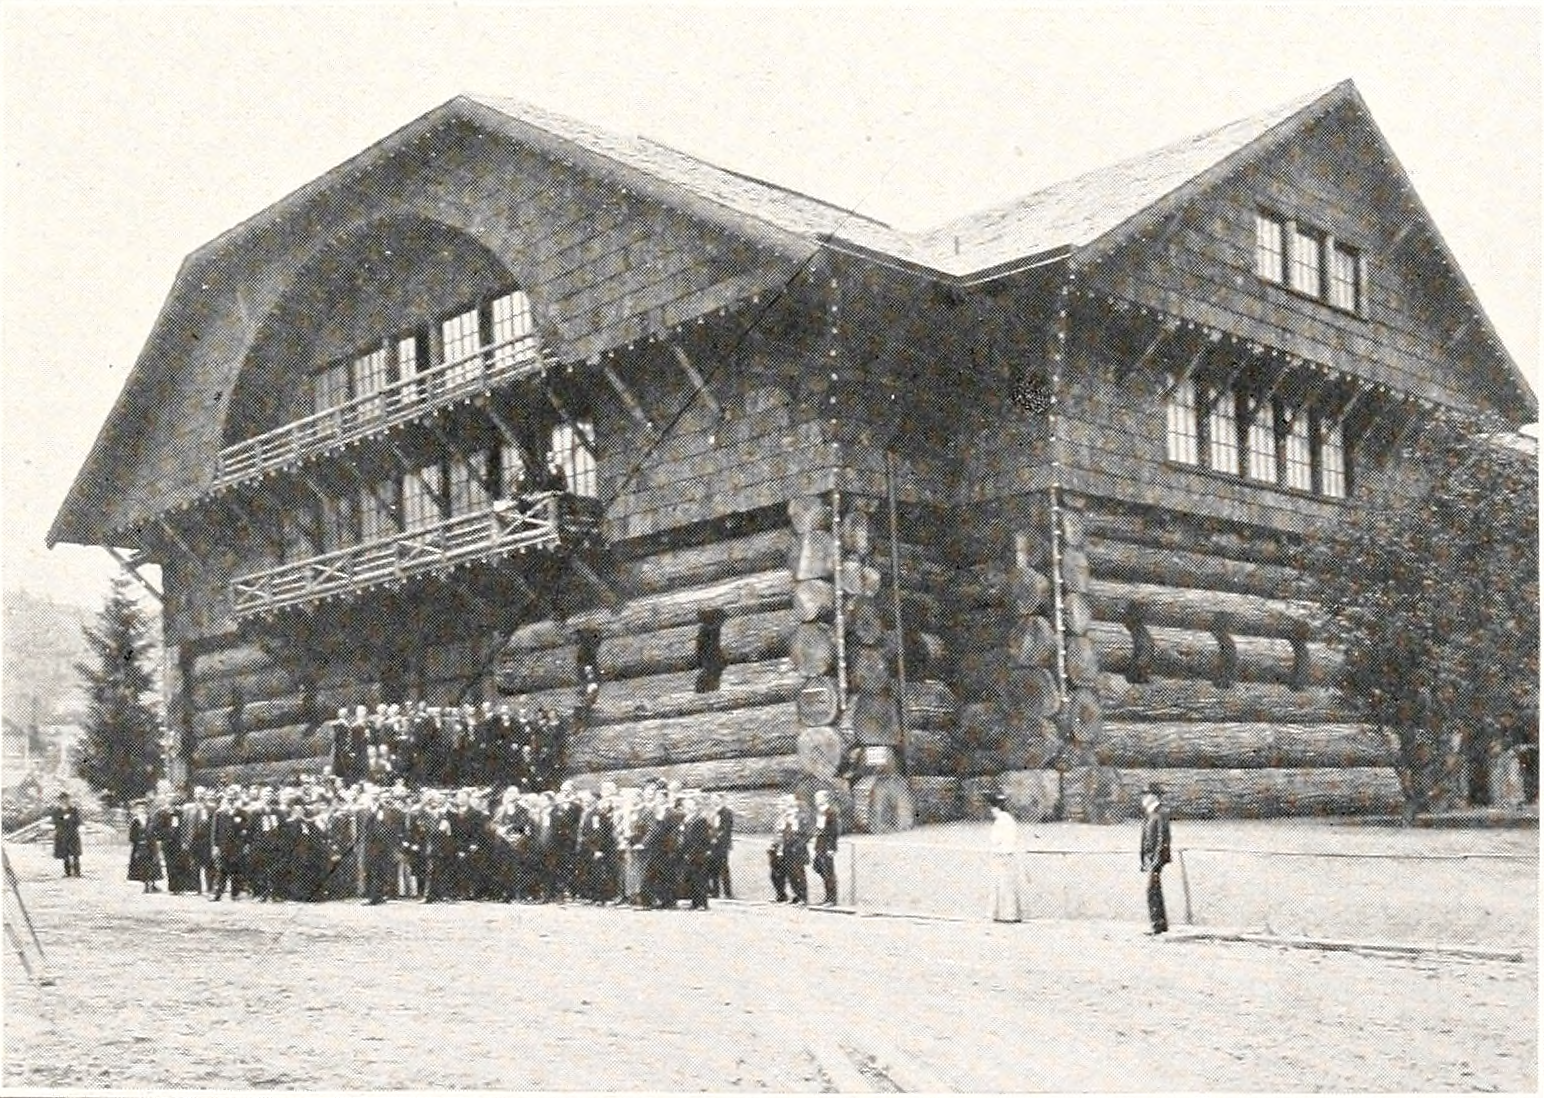 https://upload.wikimedia.org/wikipedia/commons/9/97/Forestry_building_from_Lewis_and_Clark_Exposition.png